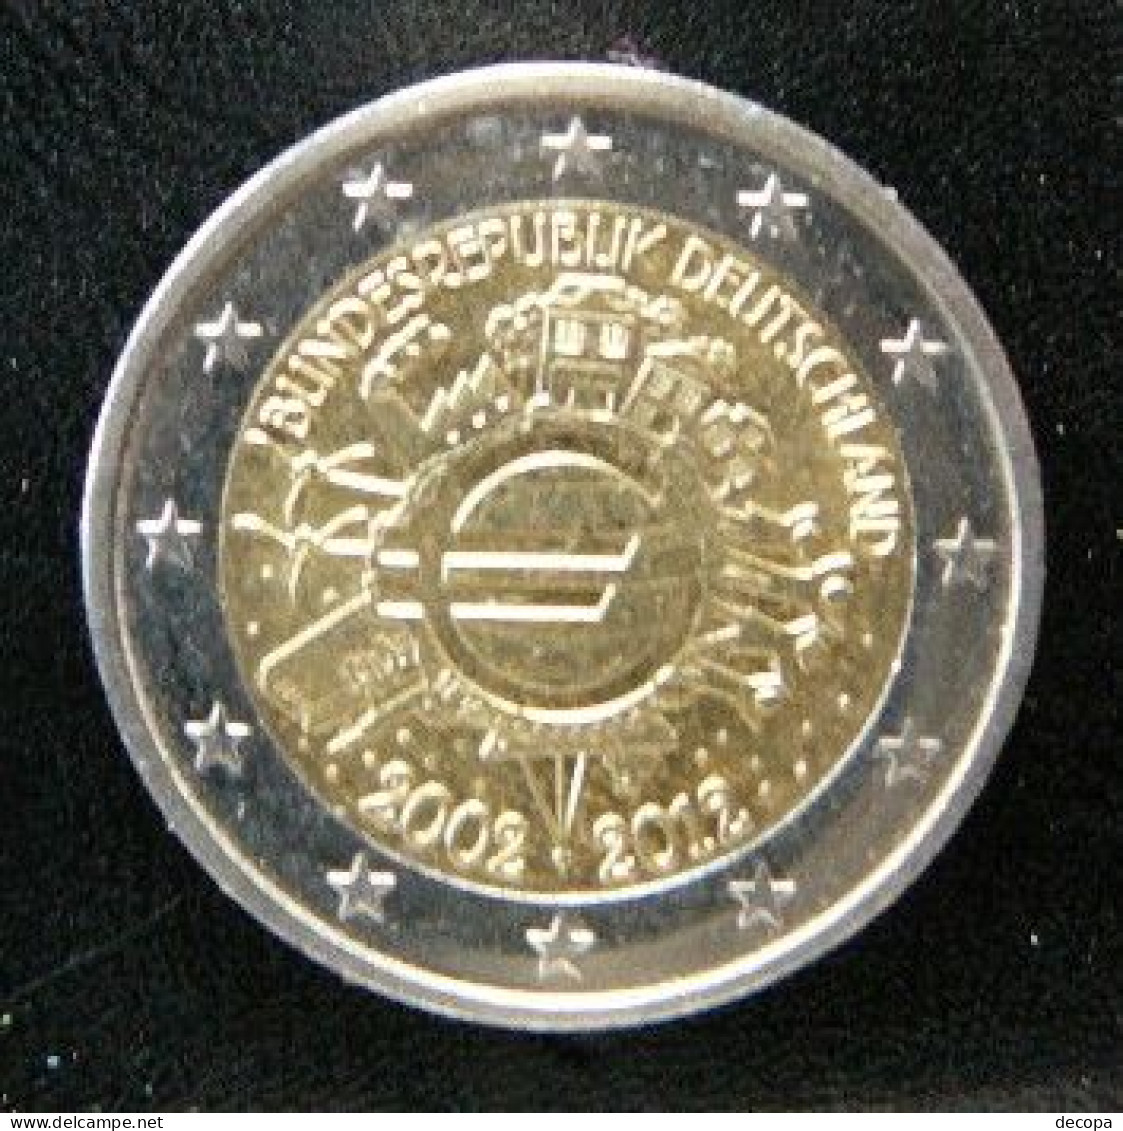 Germany - Allemagne - Duitsland   2 EURO 2012 F   10 Years Euro      Speciale Uitgave - Commemorative - Germania